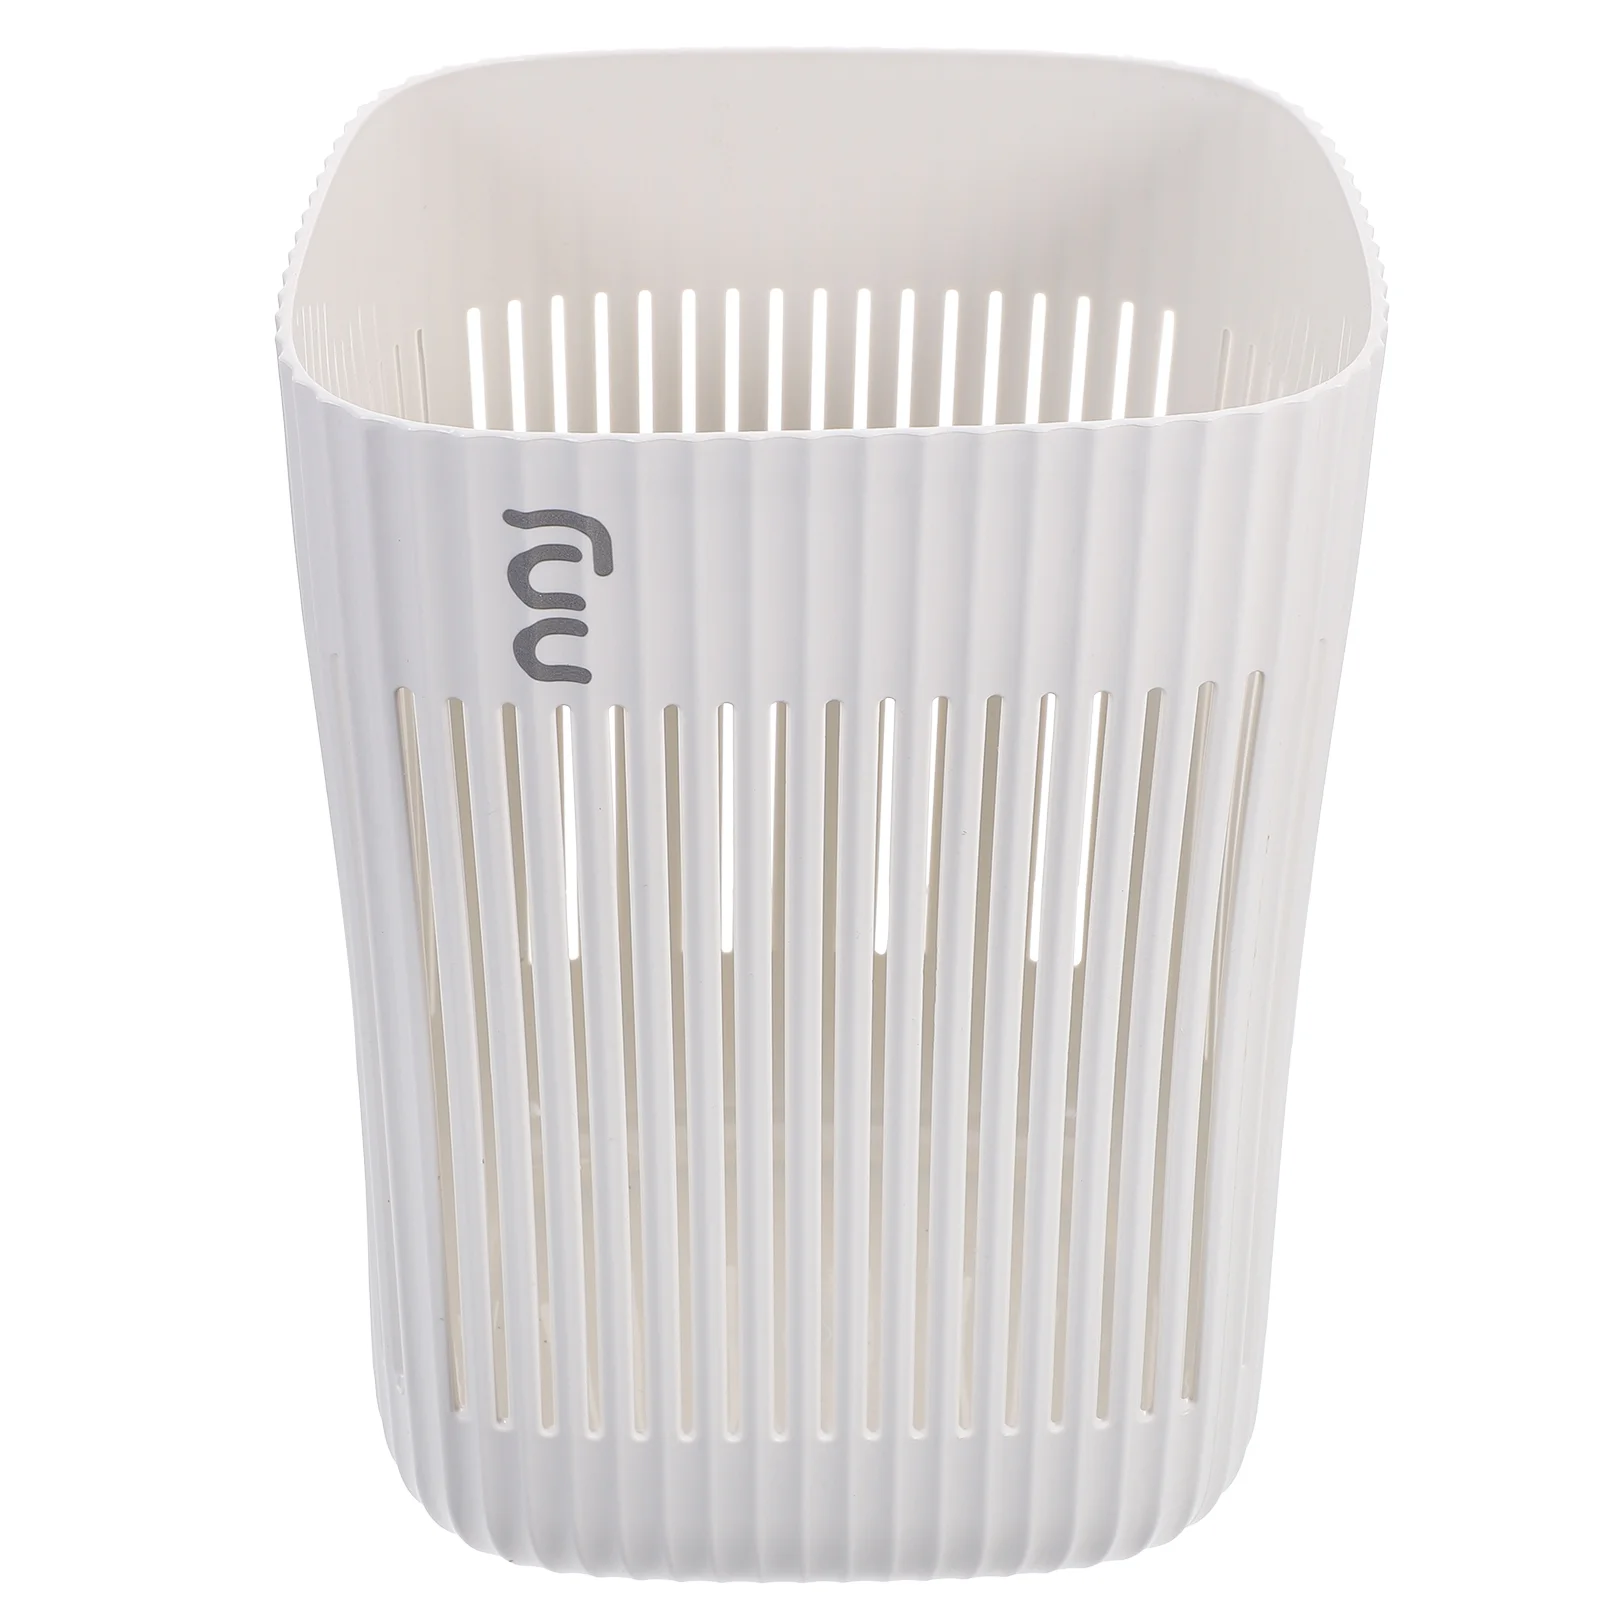 

Trash Can Waste Bin Garbage Basket Container Bathroom Kitchen Office Bedroom Wastebasket Recycling Paper Cans Smallrubbishroom